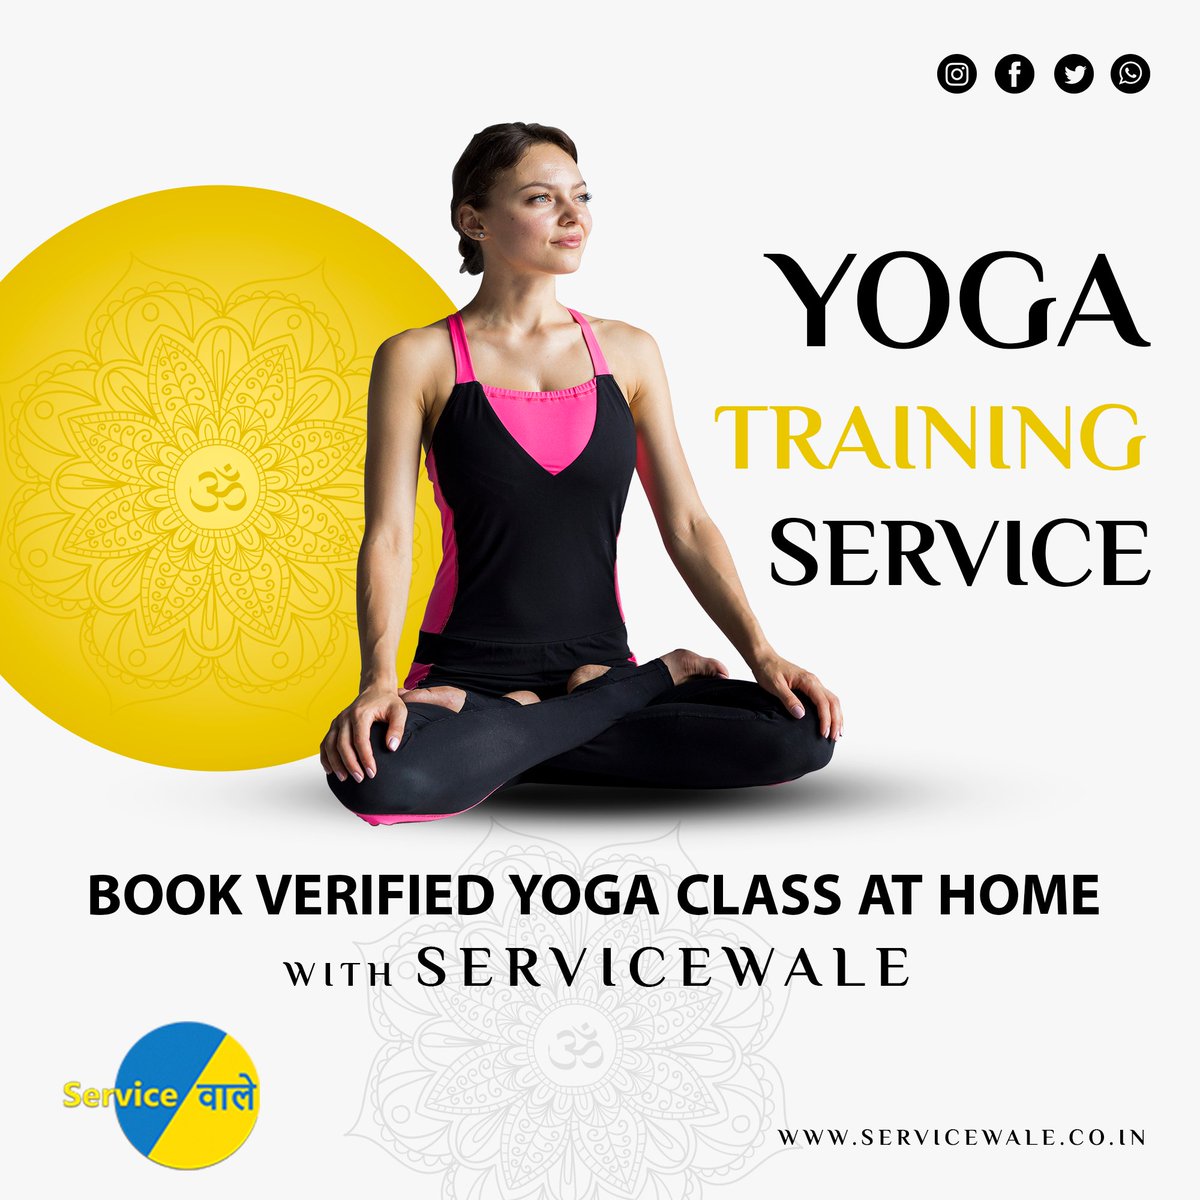 Book verified Yoga Service at Home with SERVICEWALE.

BOOK NOW!!
SERVICEWALE.CO.IN

#faceyoga #yoga #skincare #selfcare #beauty #facefitness #facialmassage #antiaging #faceyogamethod #facegym #faceexercise #facialyoga #natural #wellness #naturalbeauty #servicewale